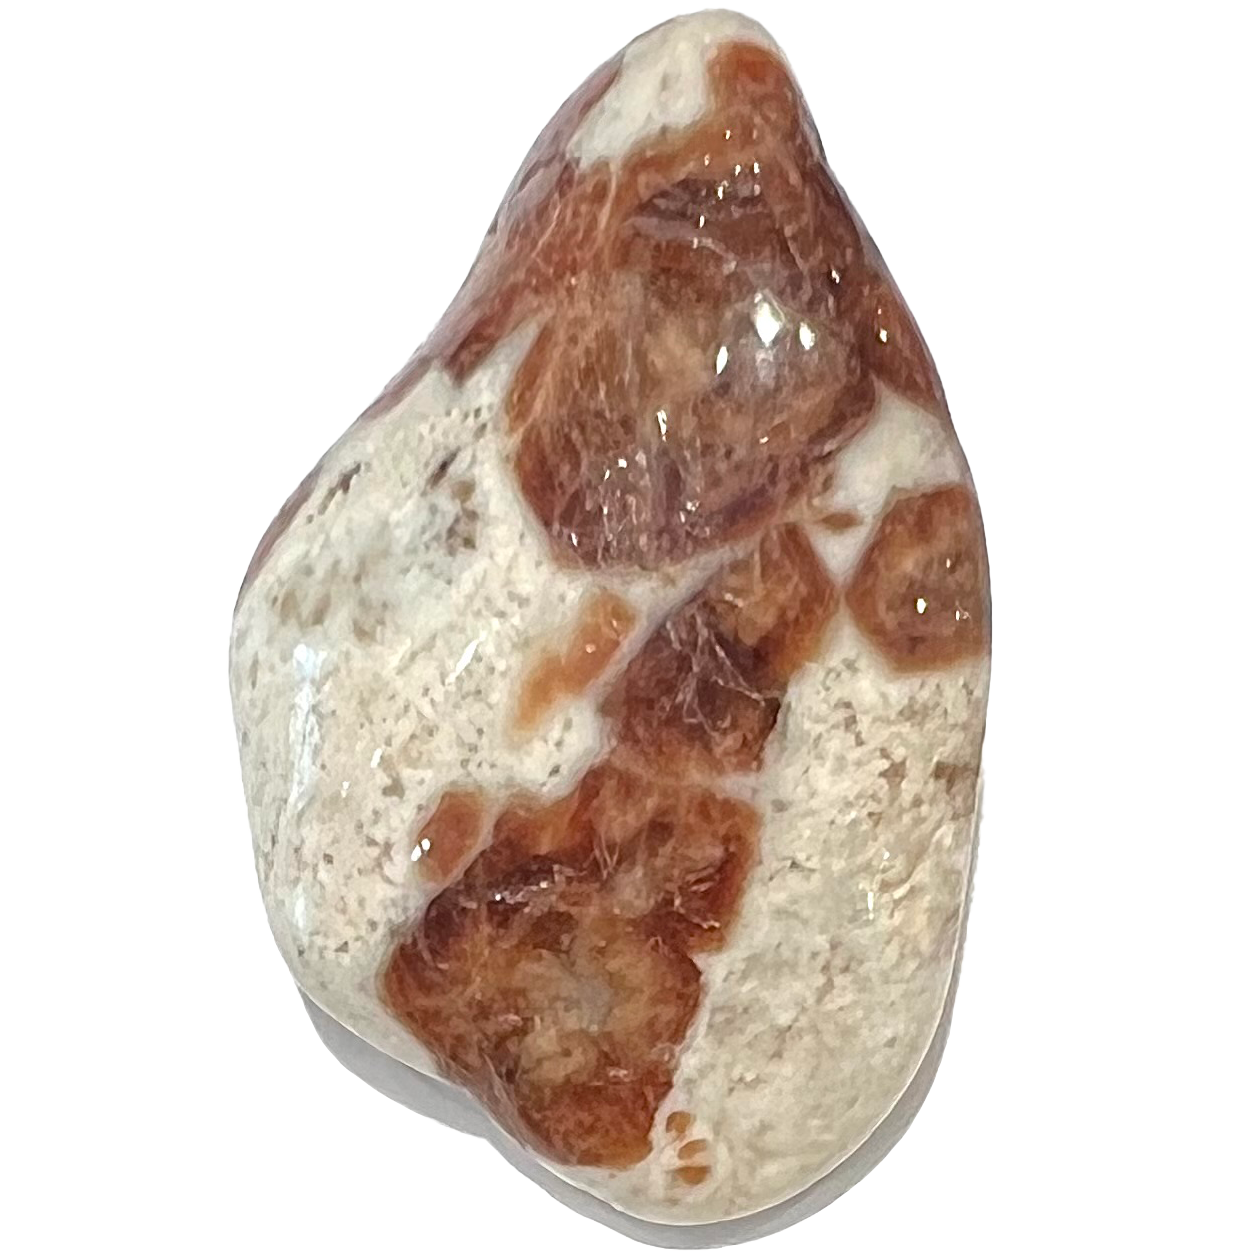 A tumbled white piece of limestone with orange garnet crystal inclusions.